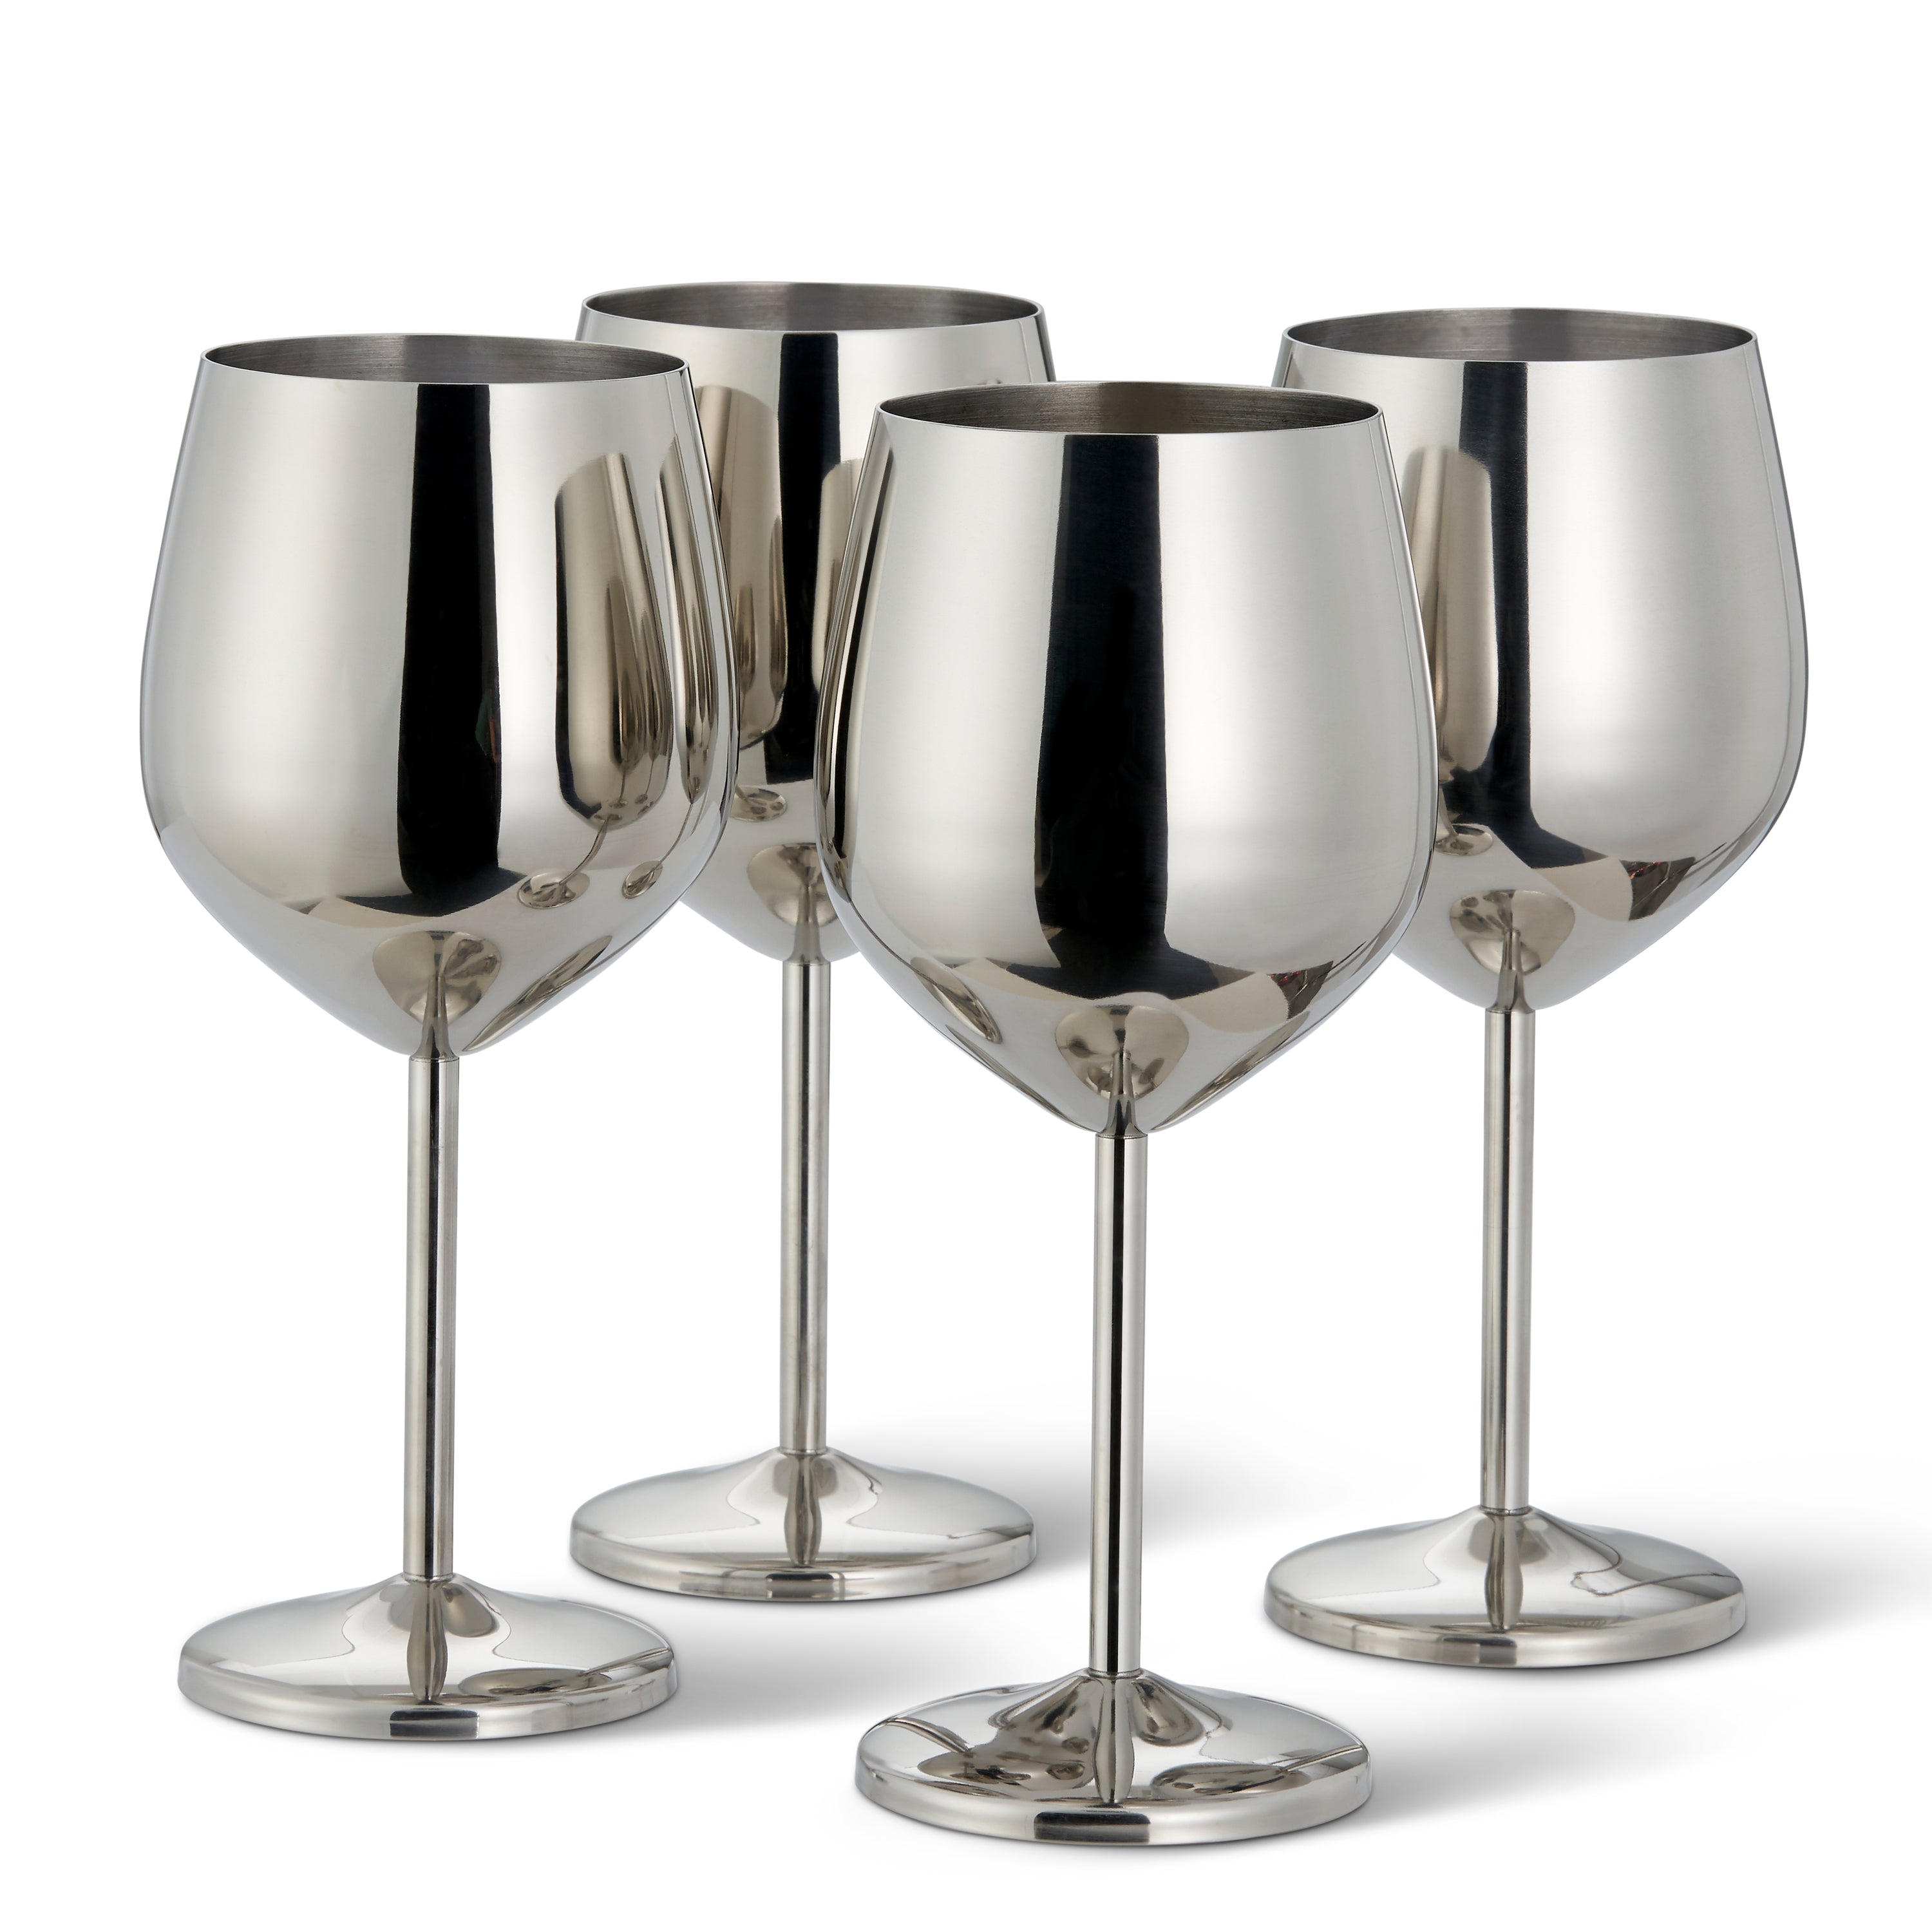 Arora Stainless Steel Wine Glass 18oz - Set of 4 Silver - 3.6 D x 8.3 H (850992)